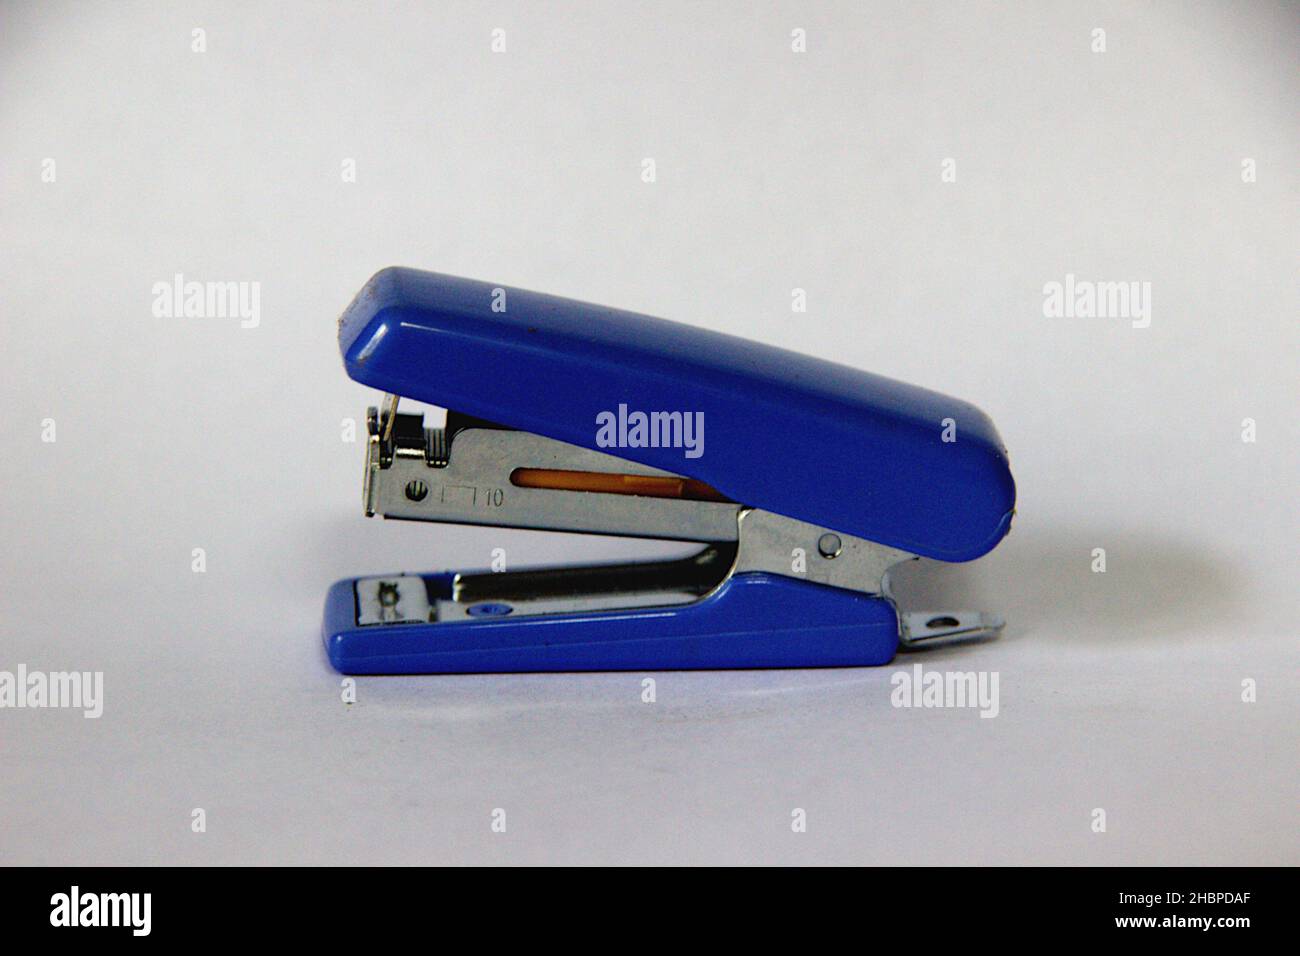 Blue color mini stapler used for stitching packages or packets isolated on white background Stock Photo